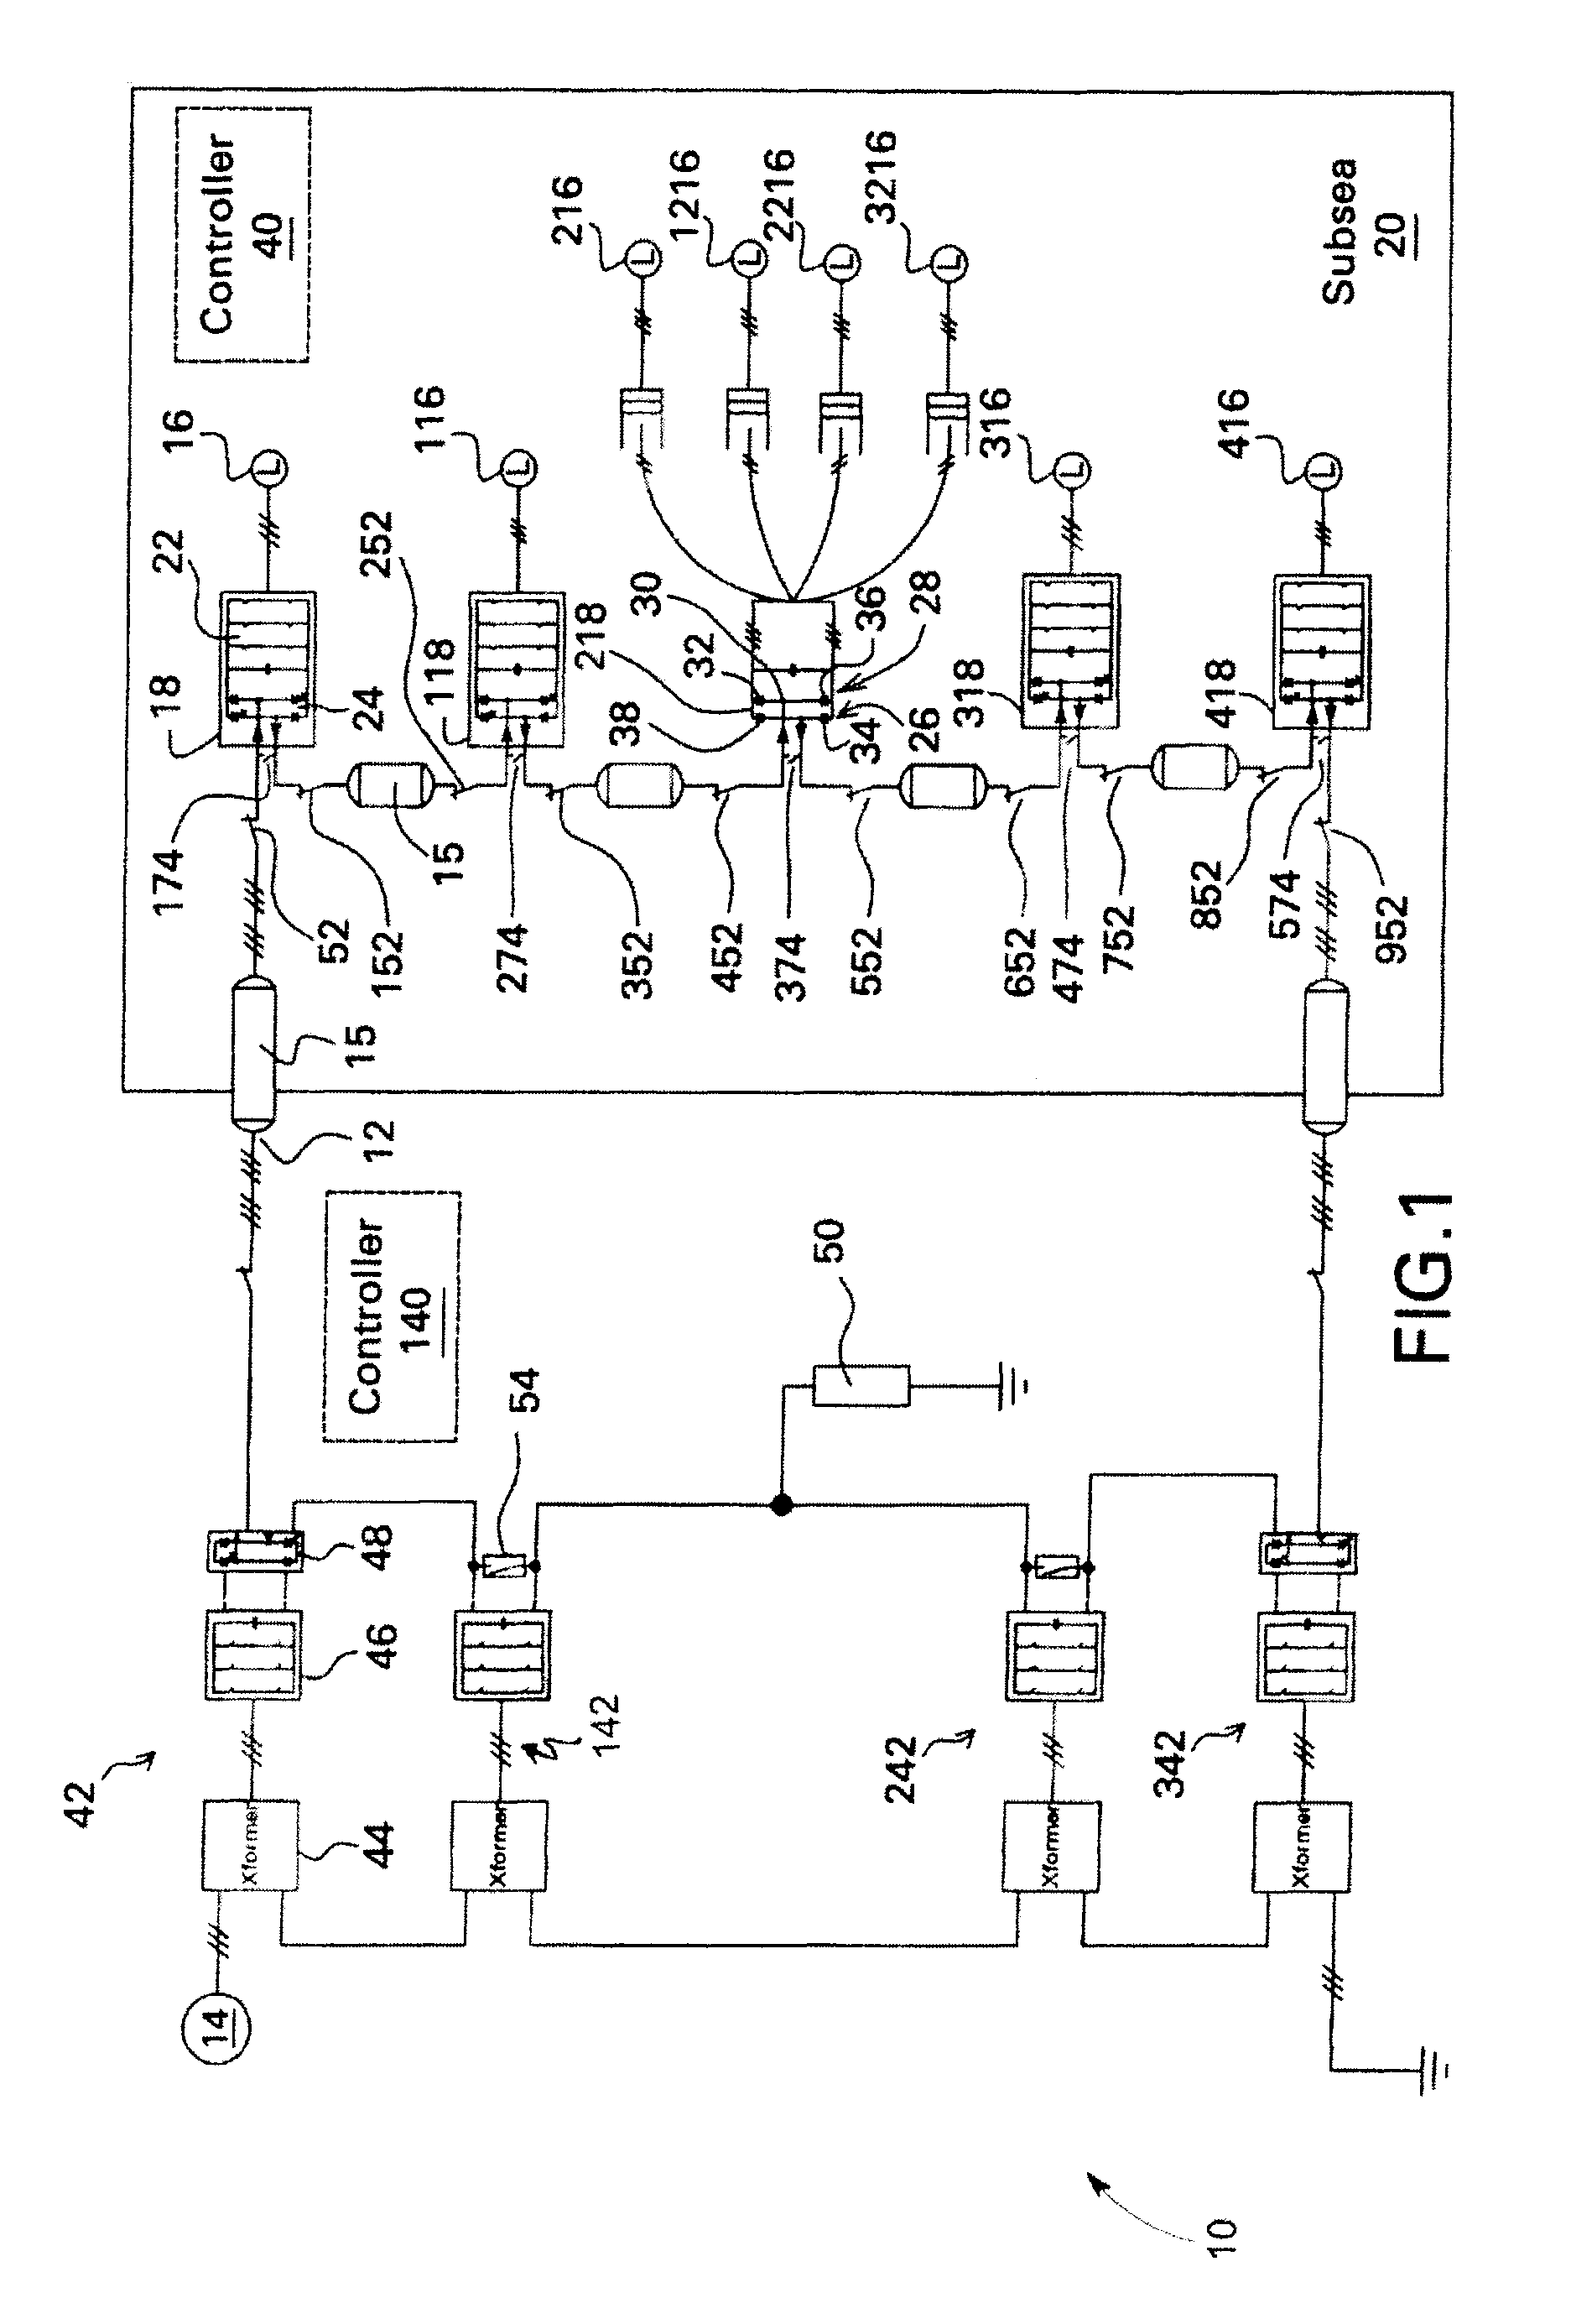 Direct current power transmission and distribution system